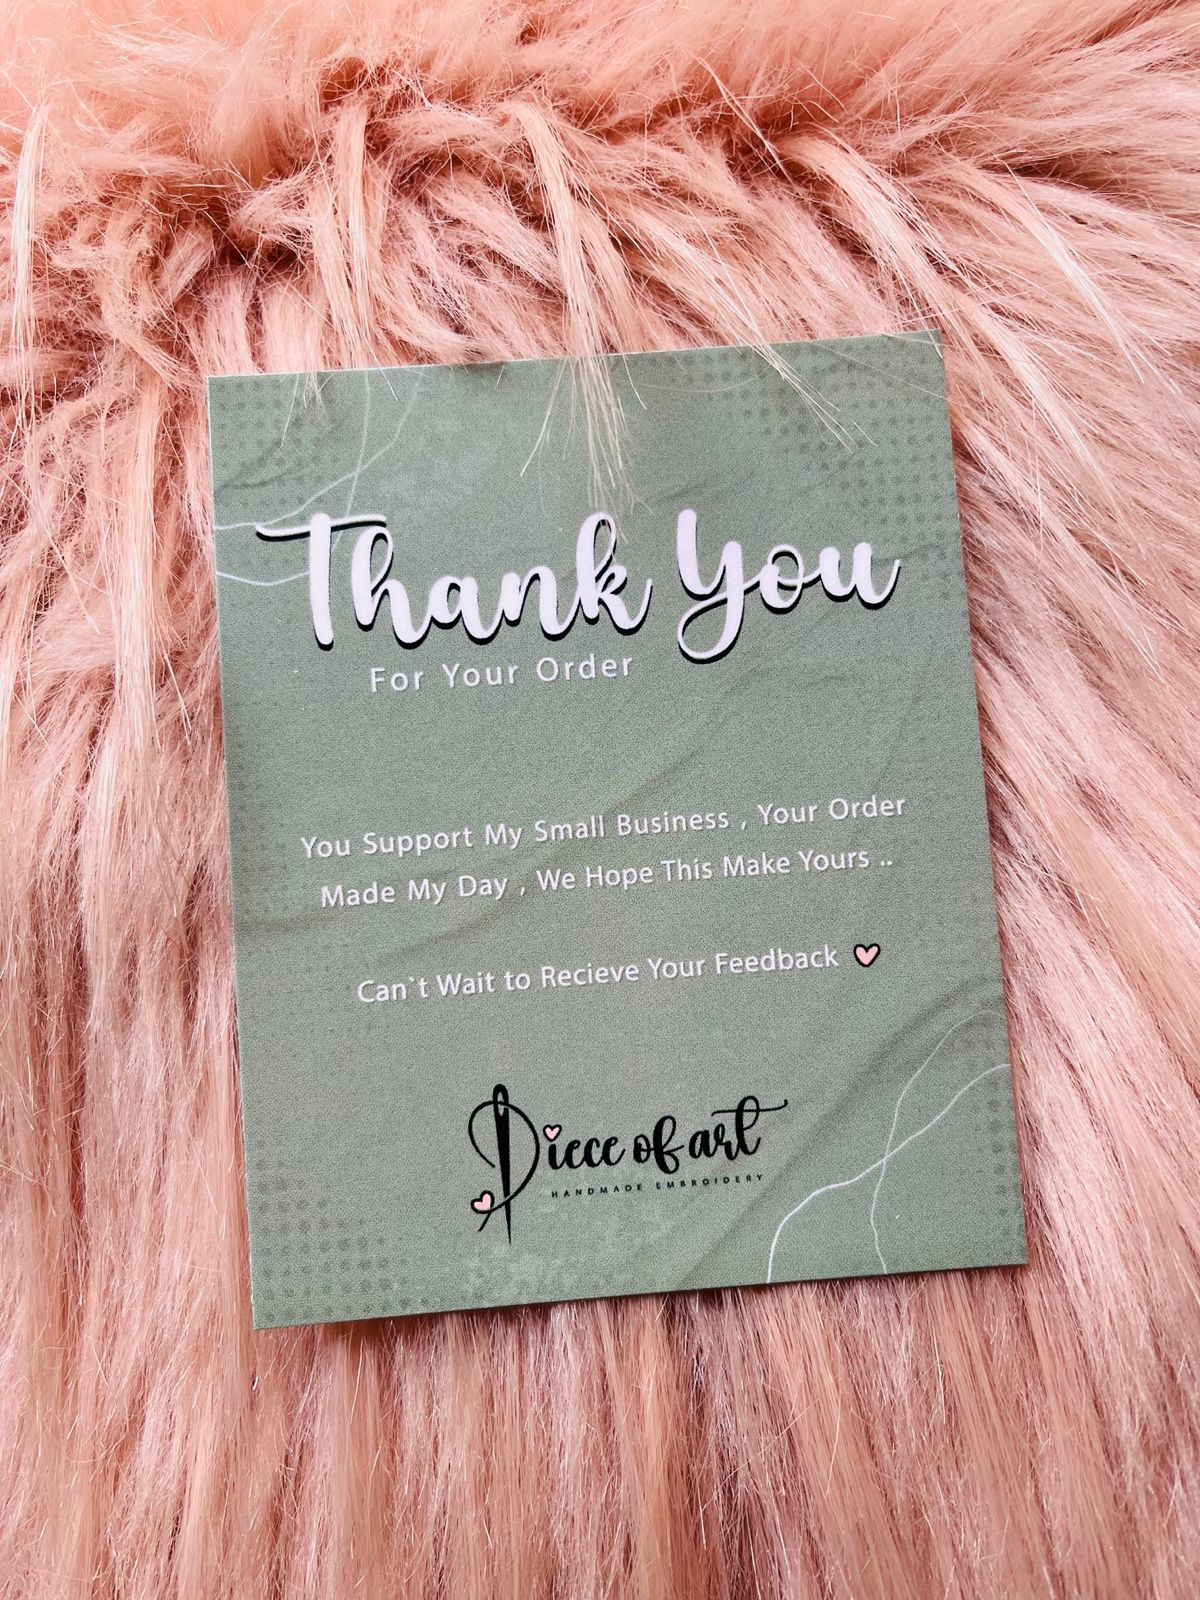 handwriting font Logo Design business card thank you card facebook cover graphic design  identity art handmade embroidery